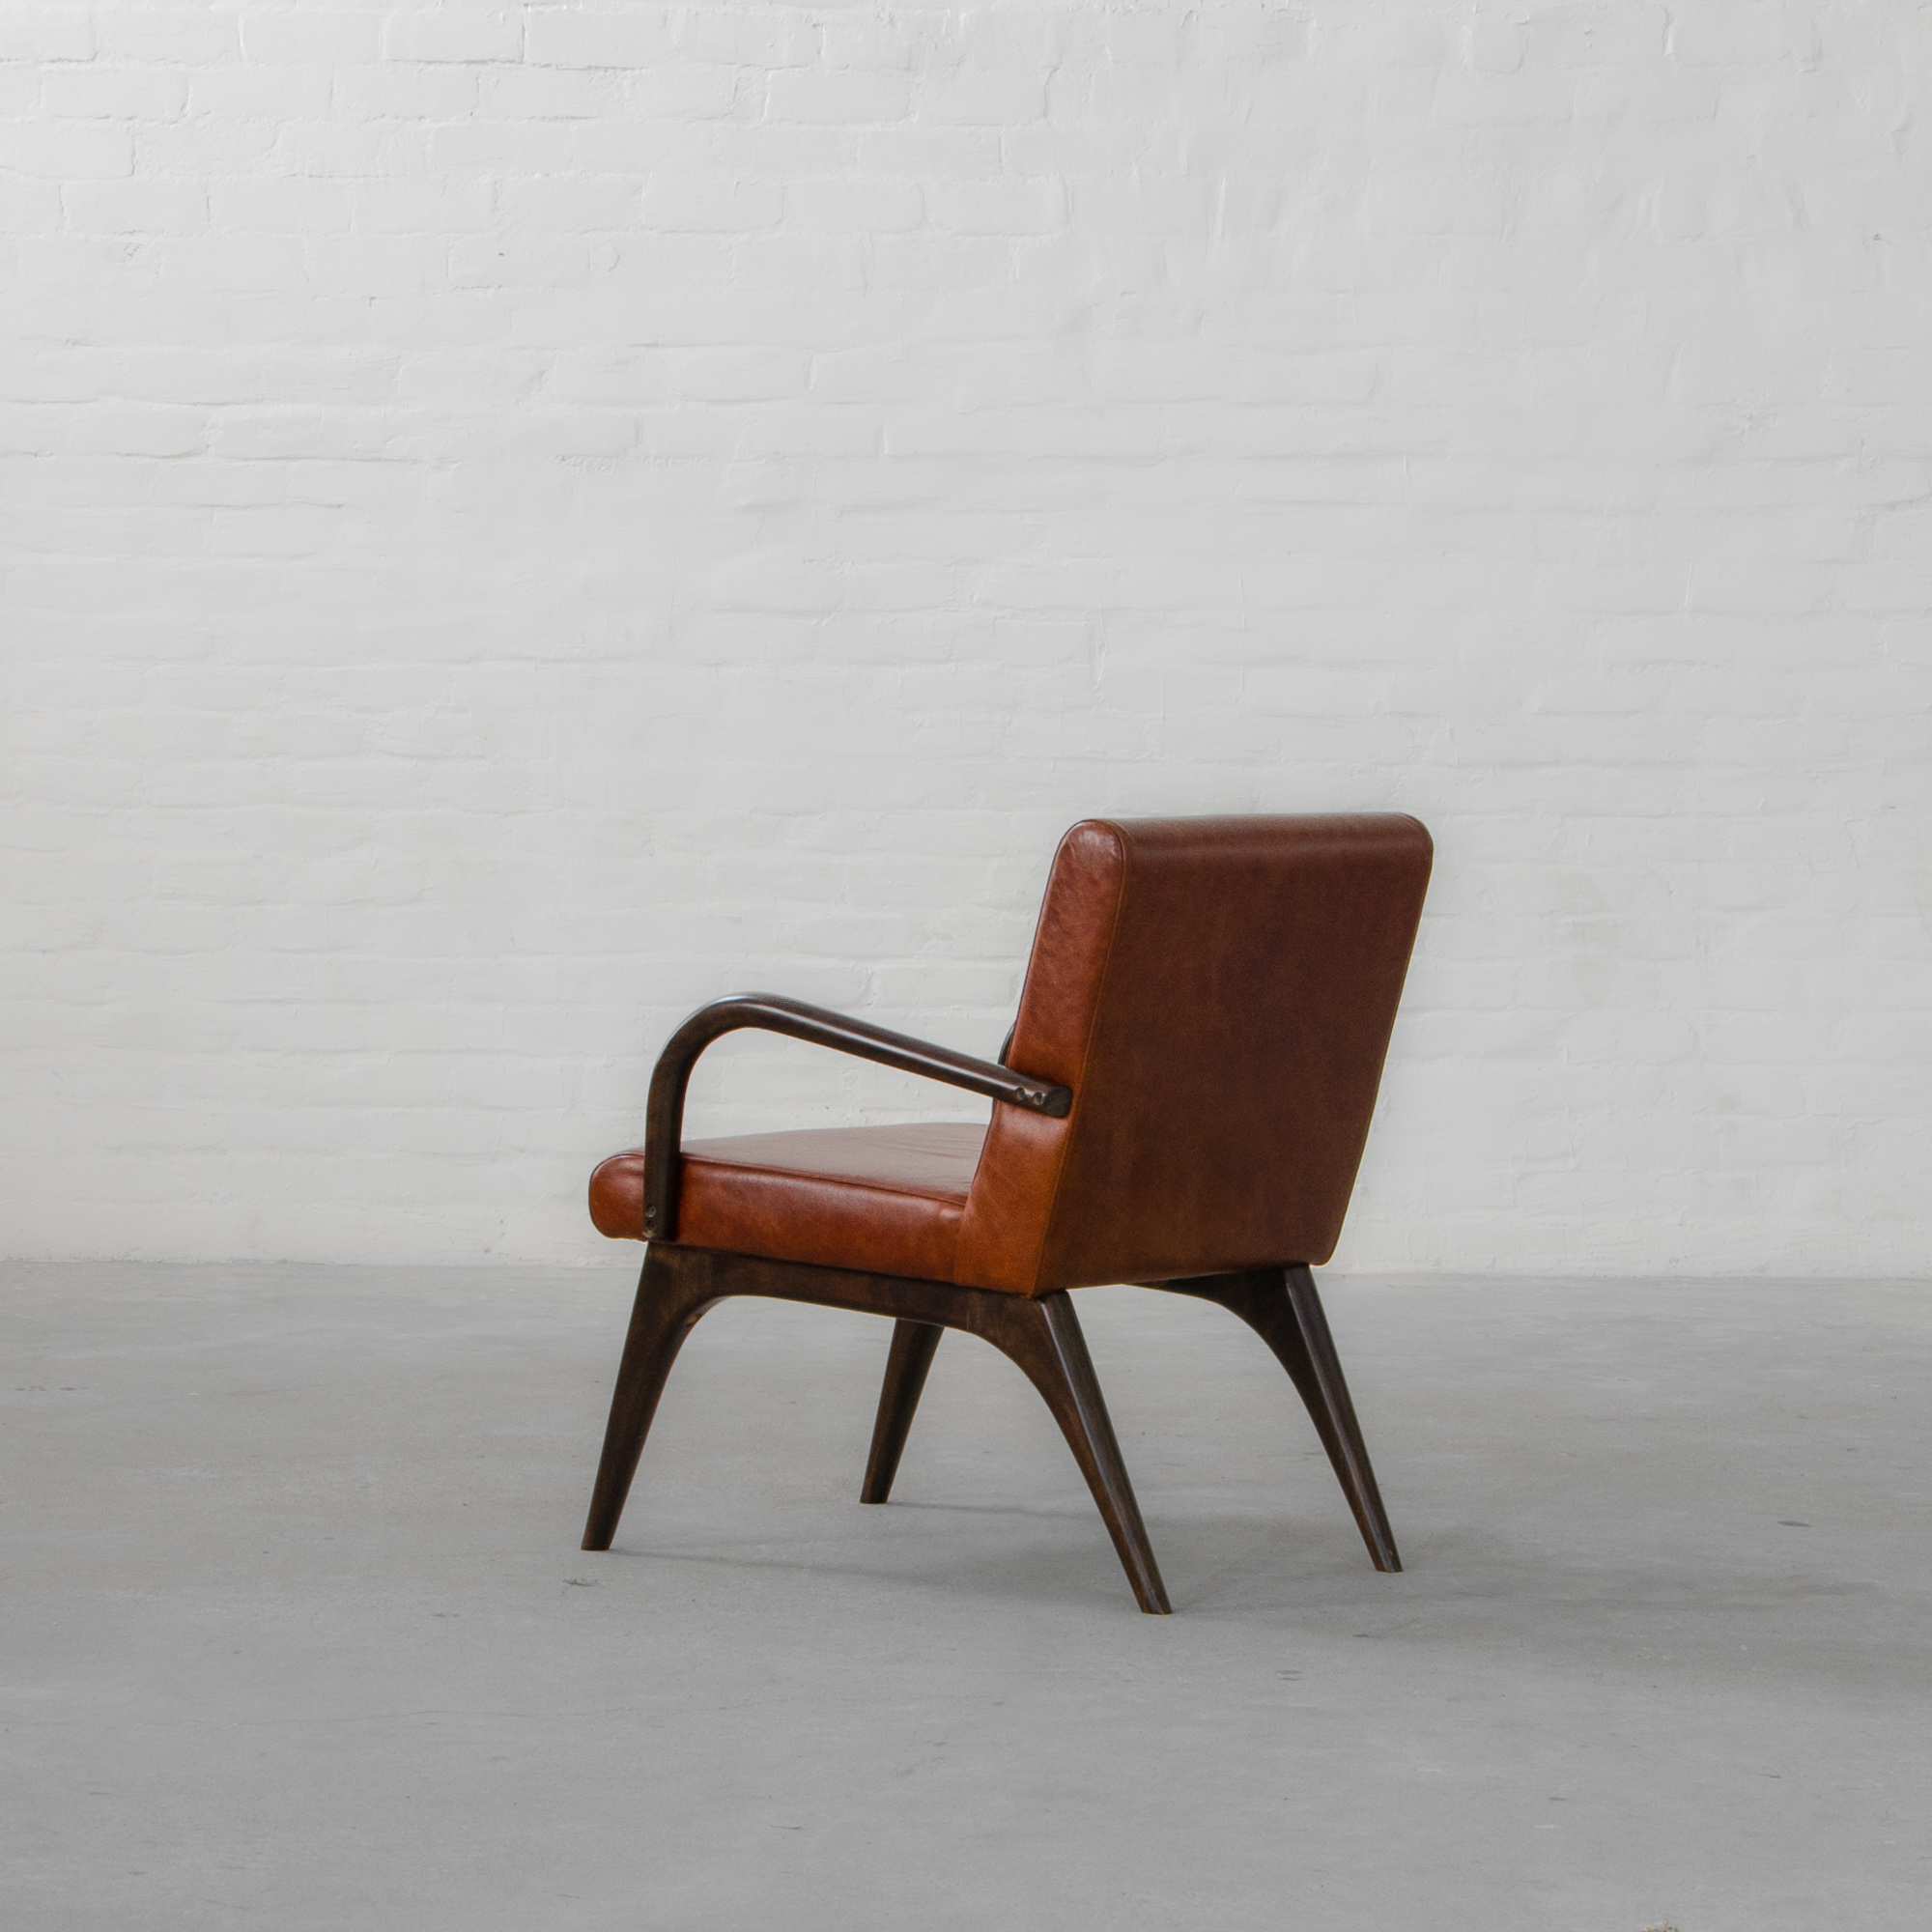 The Bombay House Leather Armchair